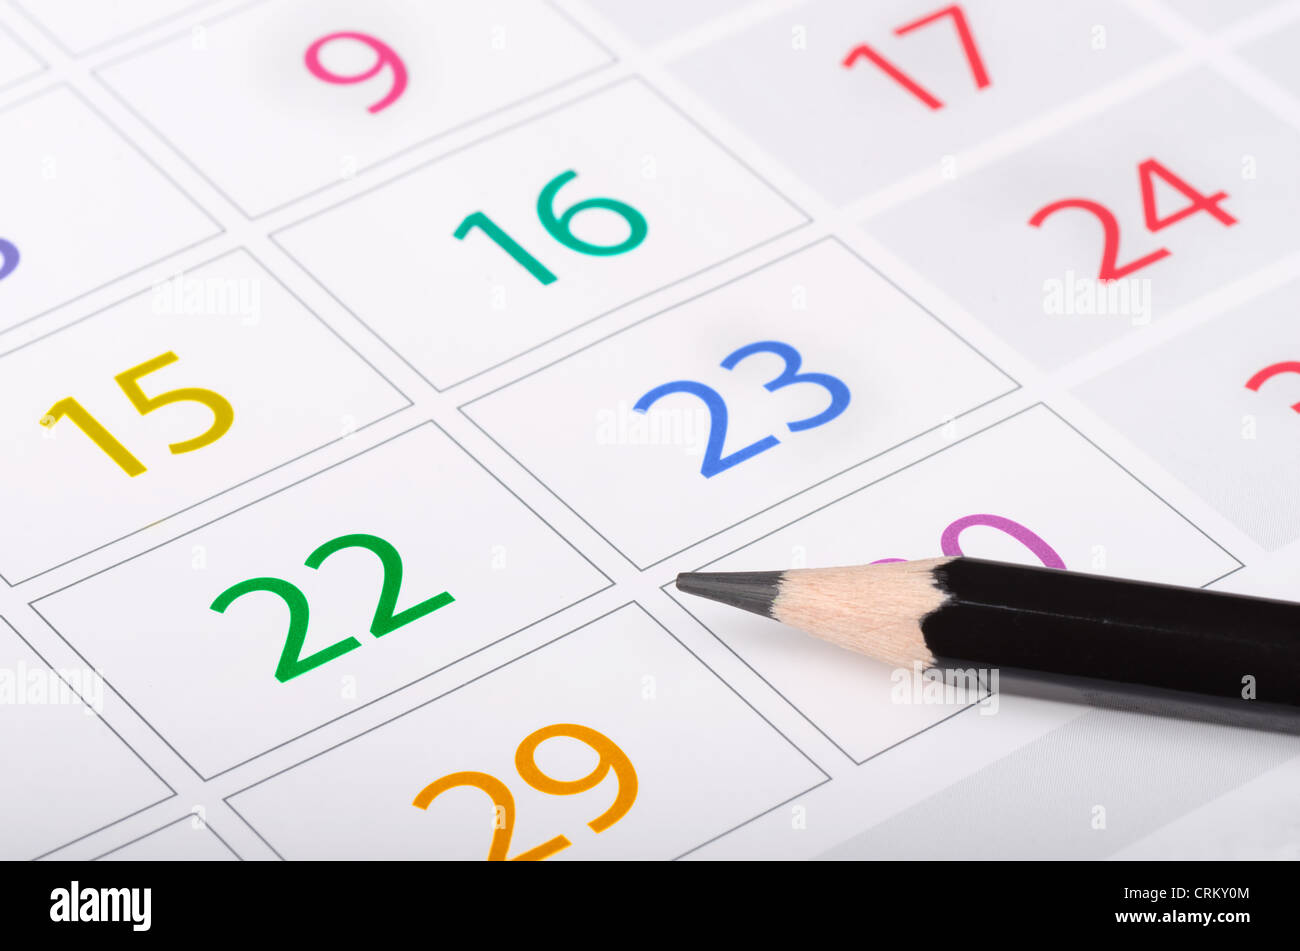 Black pencil on calendar page with colorful dates Stock Photo